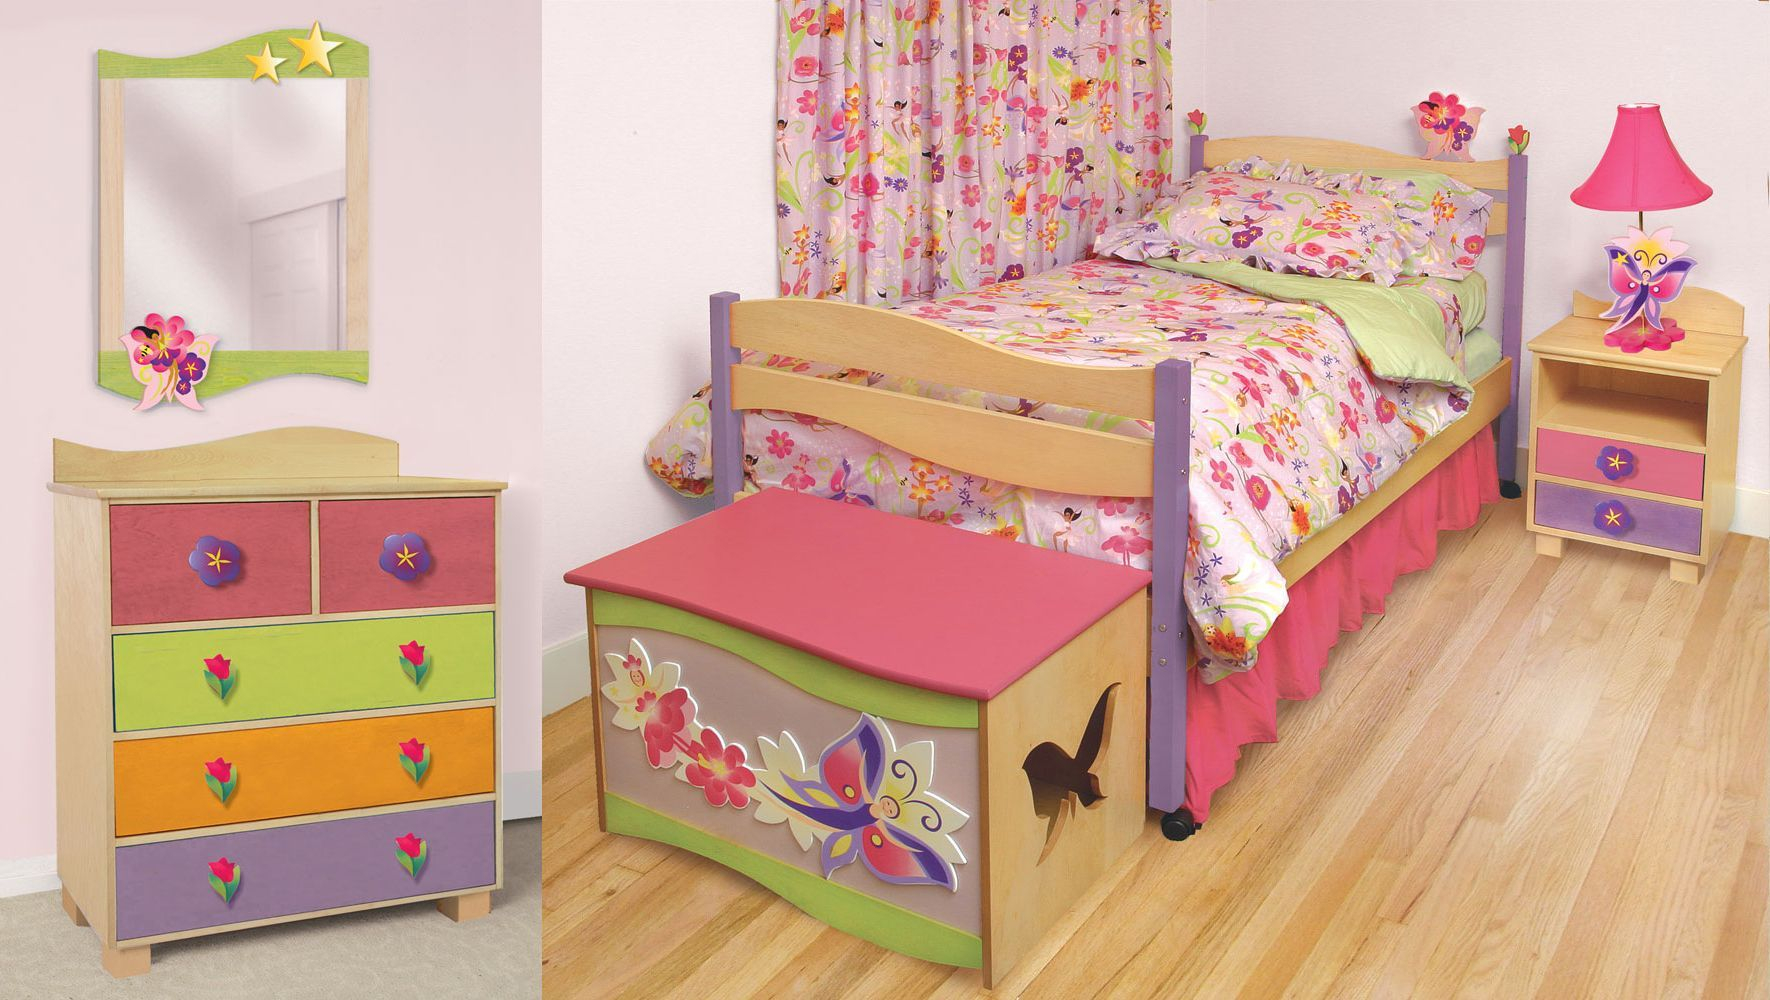 Cute Minimalist Bedroom Set For Toddler Girl Complete With Dresser regarding dimensions 1770 X 1000